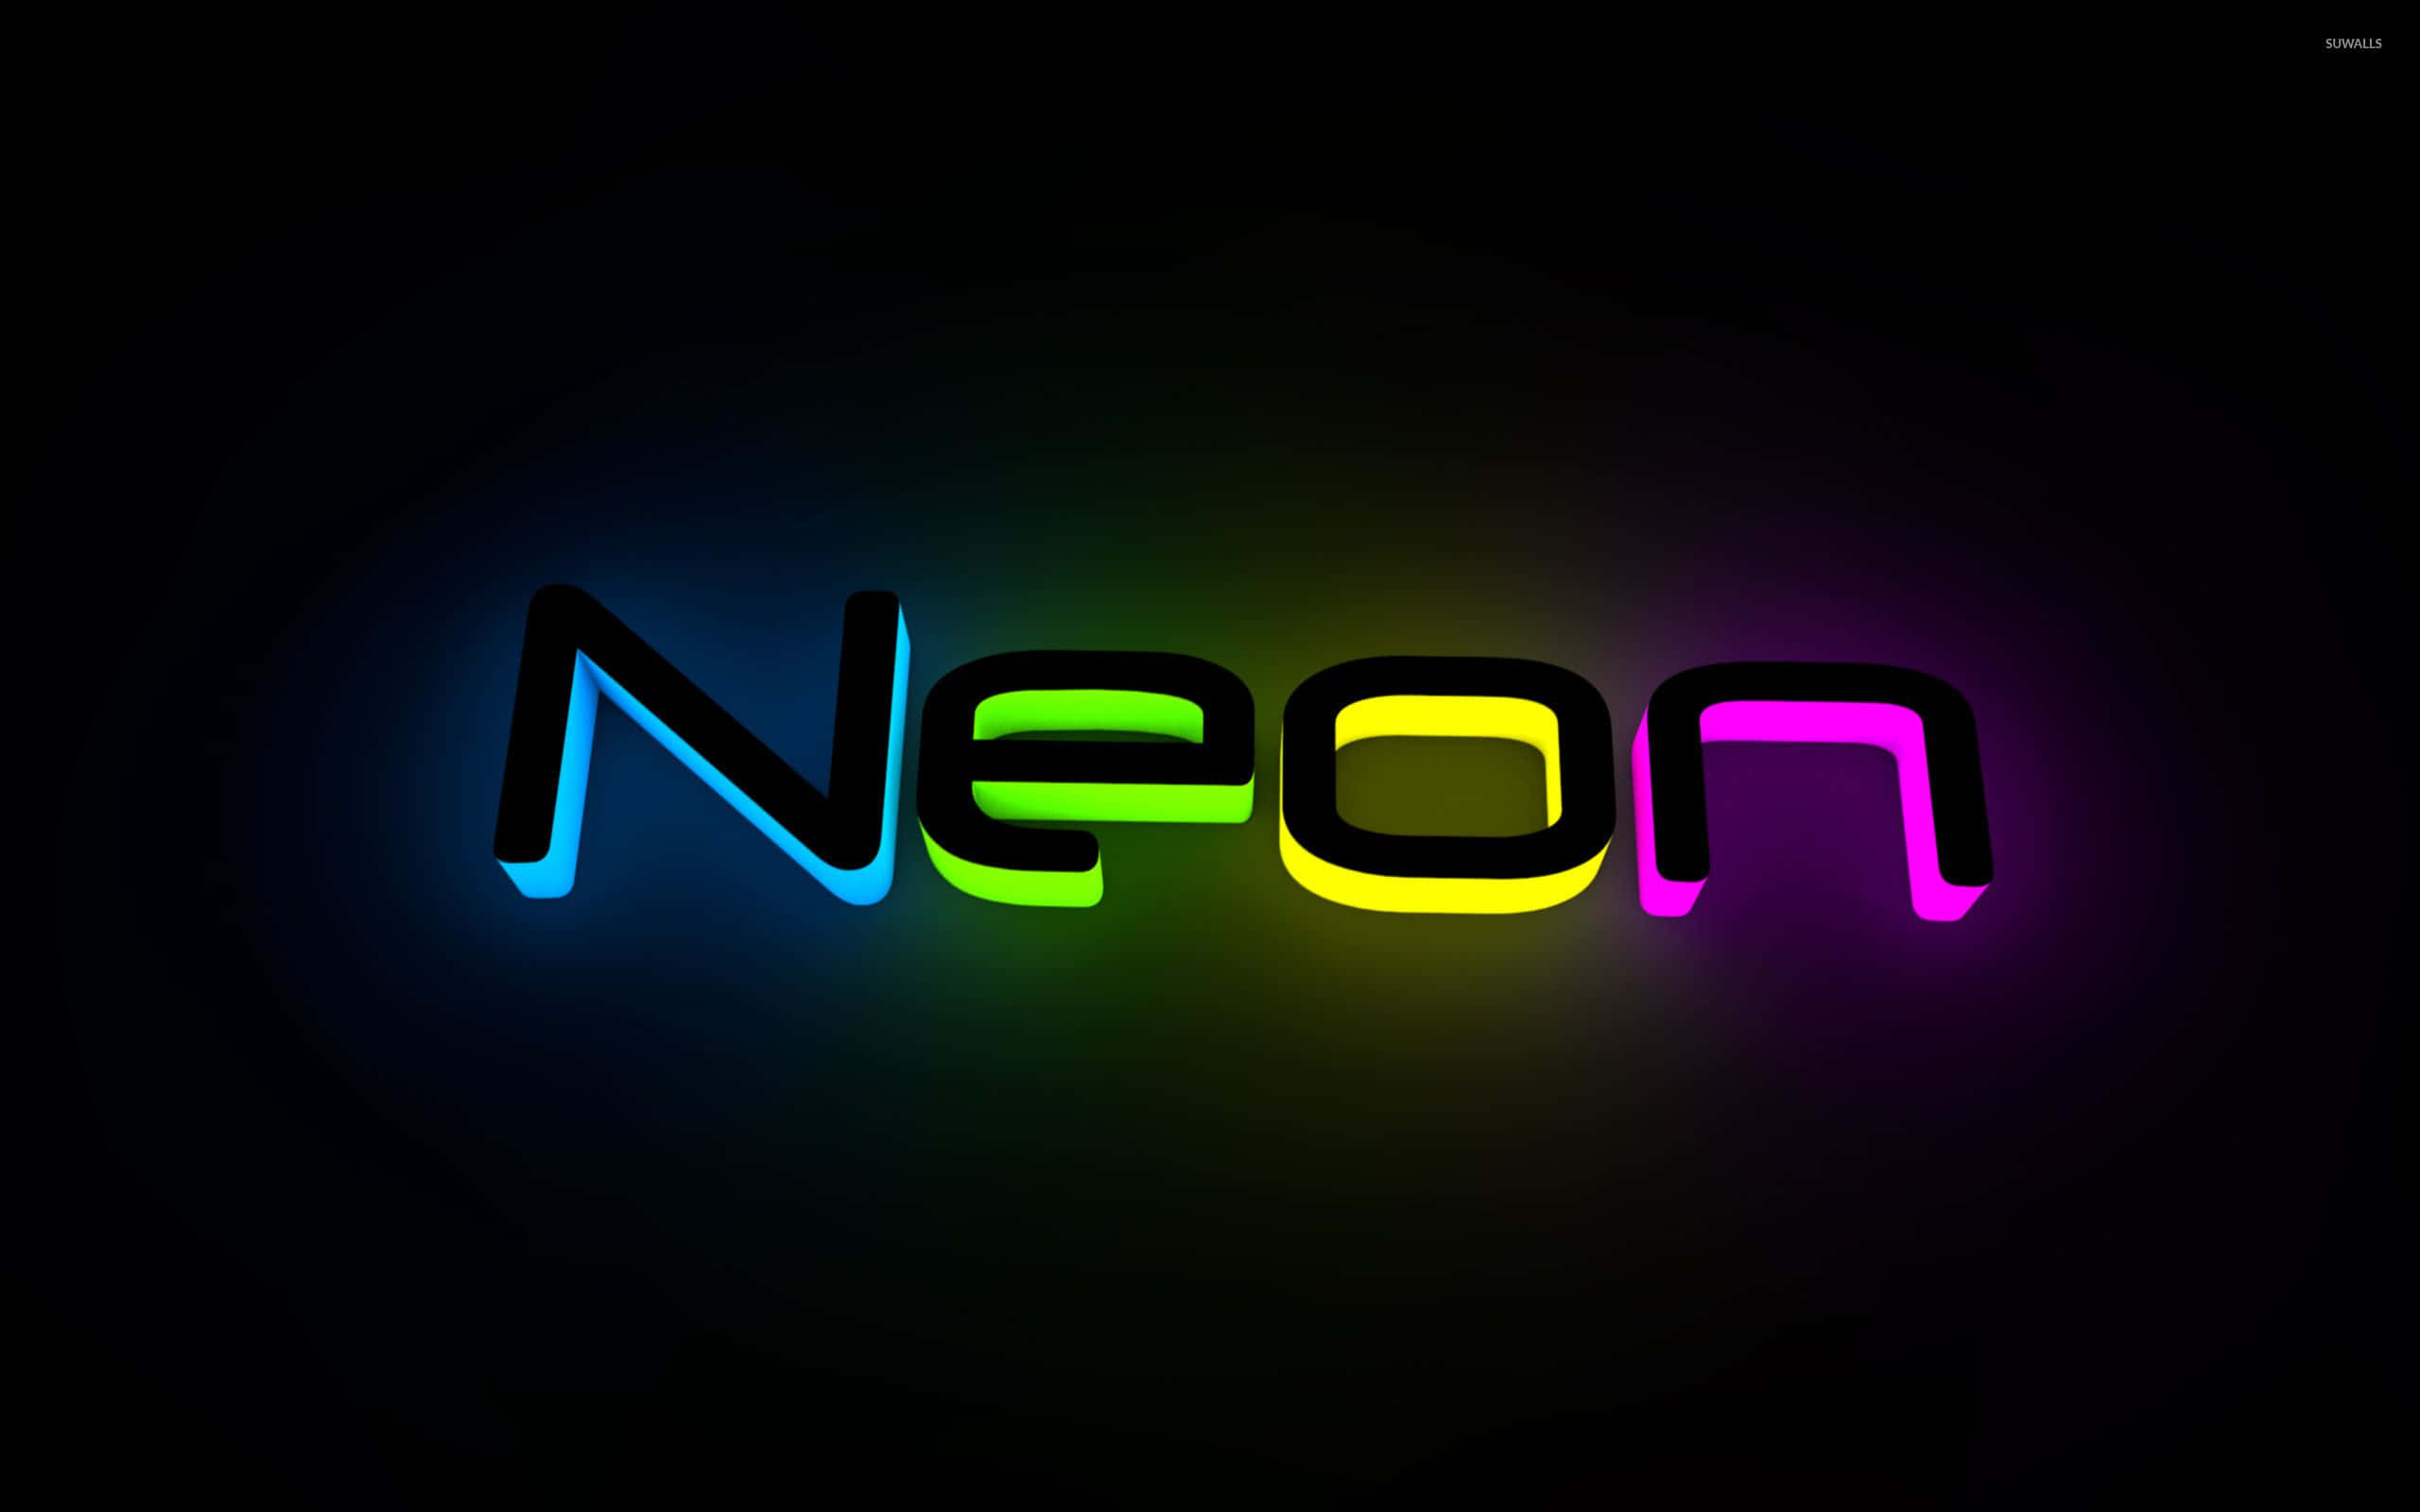 Lit up the night with neon lights